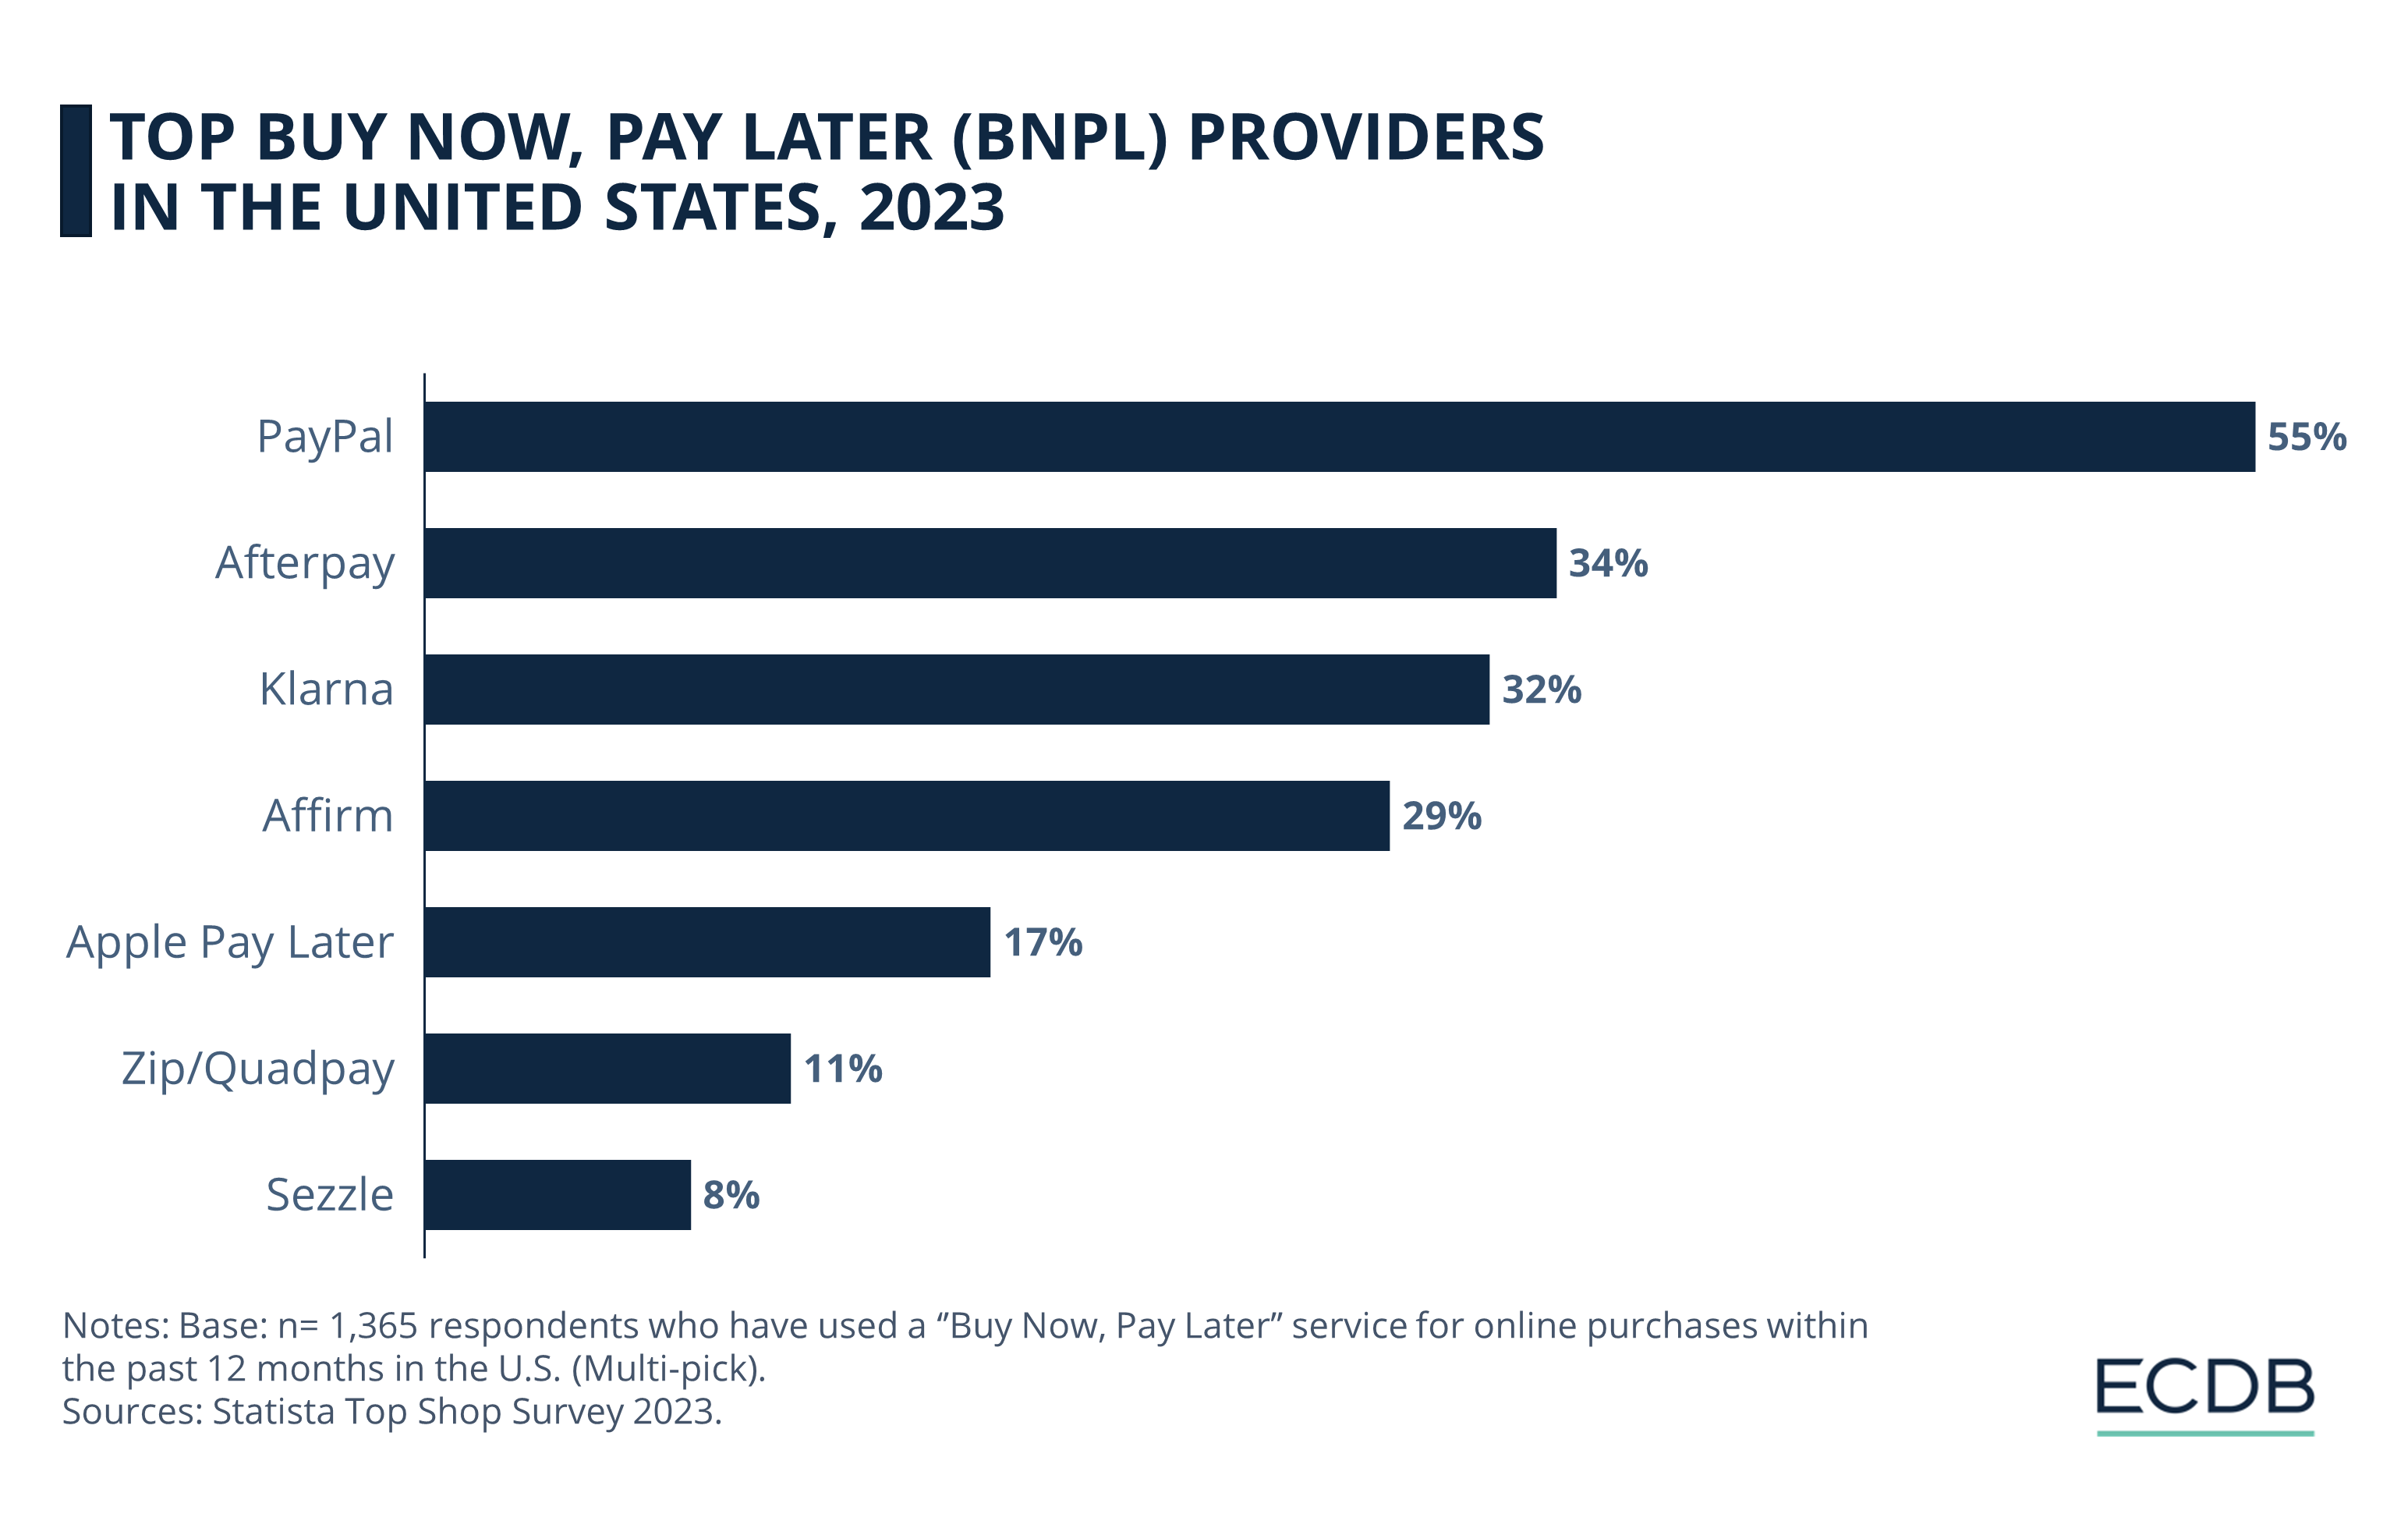 Top Buy Now, Pay Later (BNPL) Providers in the United States, 2023